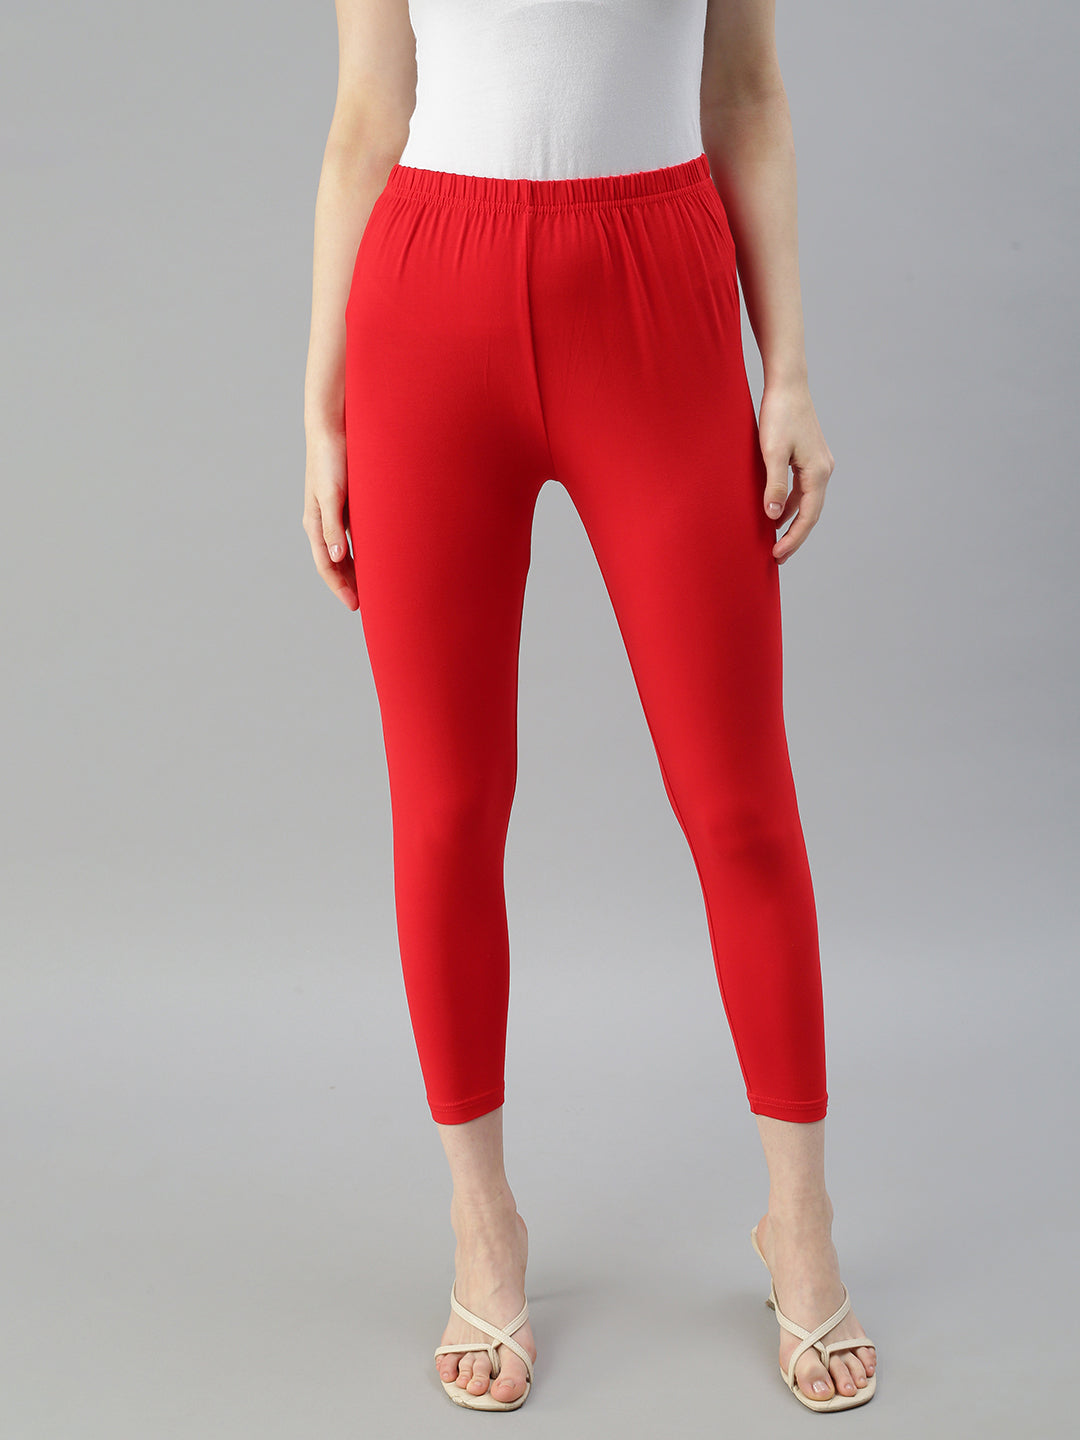 Ladies Coral Ankle Length Leggings Size M - clothing & accessories